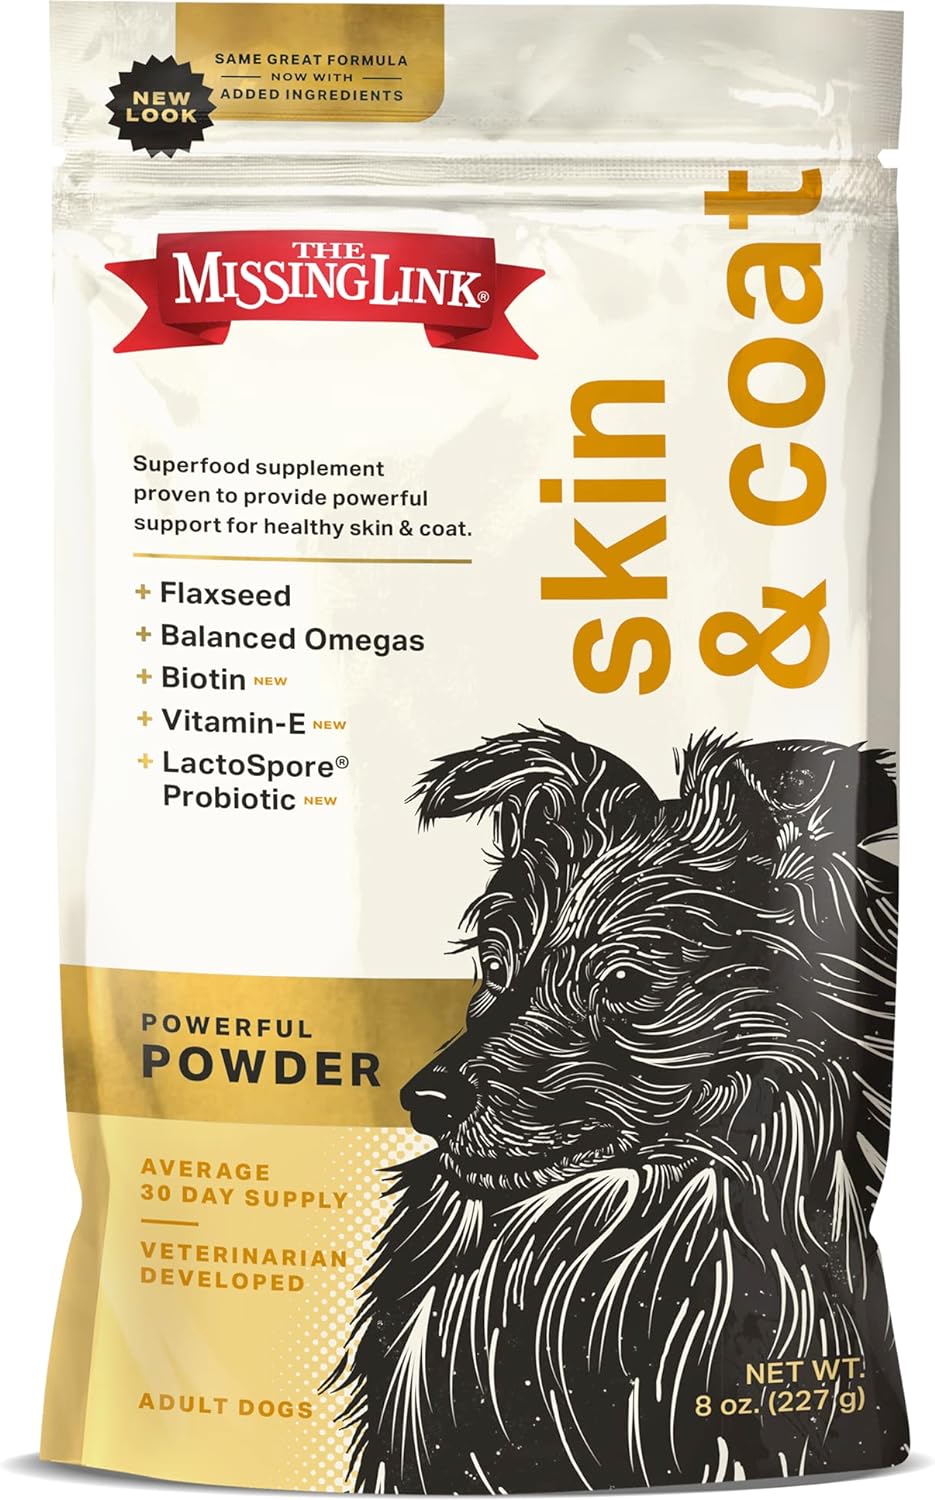 The Missing Link Skin & Coat + Probiotics Supplement 8oz Bag - Powerful Superfood Powder for Dogs Supports Healthy Skin & Glossy Coat, Promotes Hair Growth